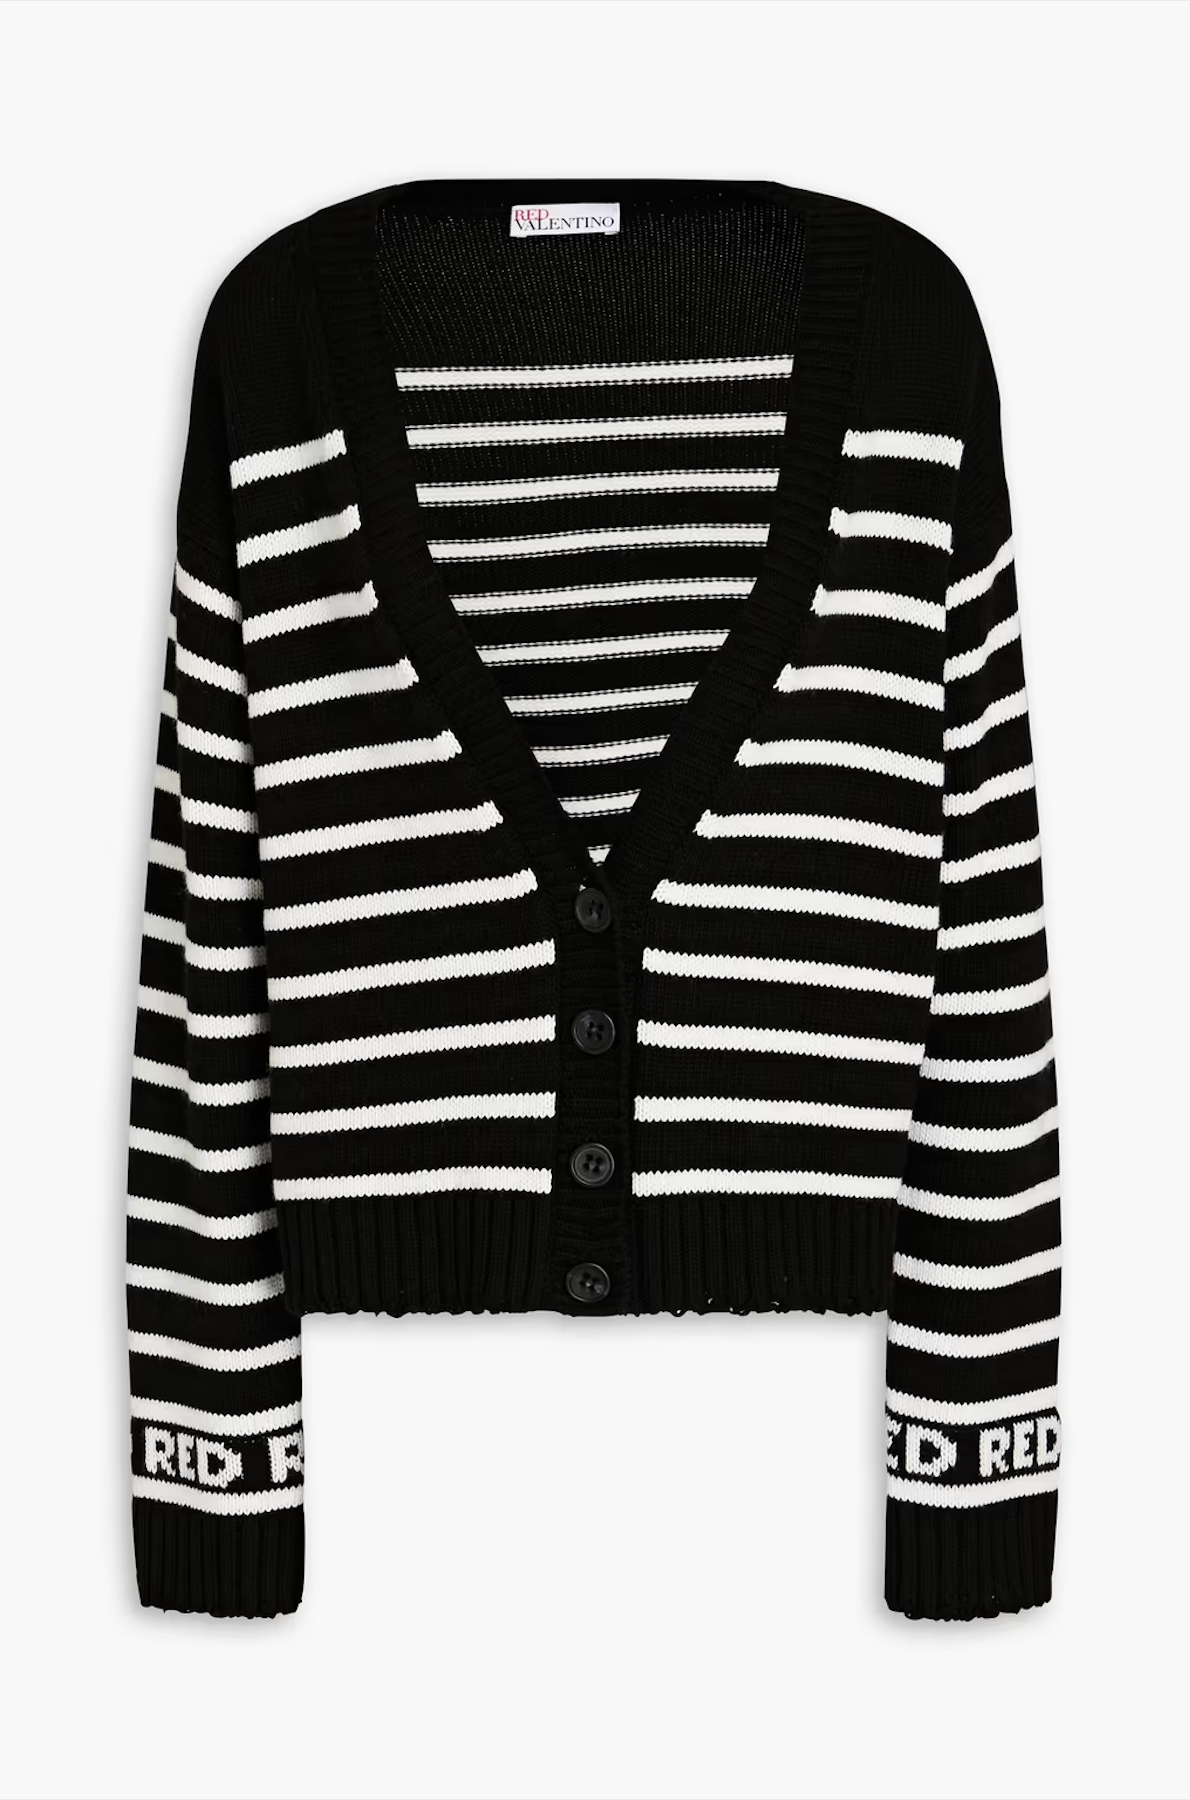 Striped knitted cardigan